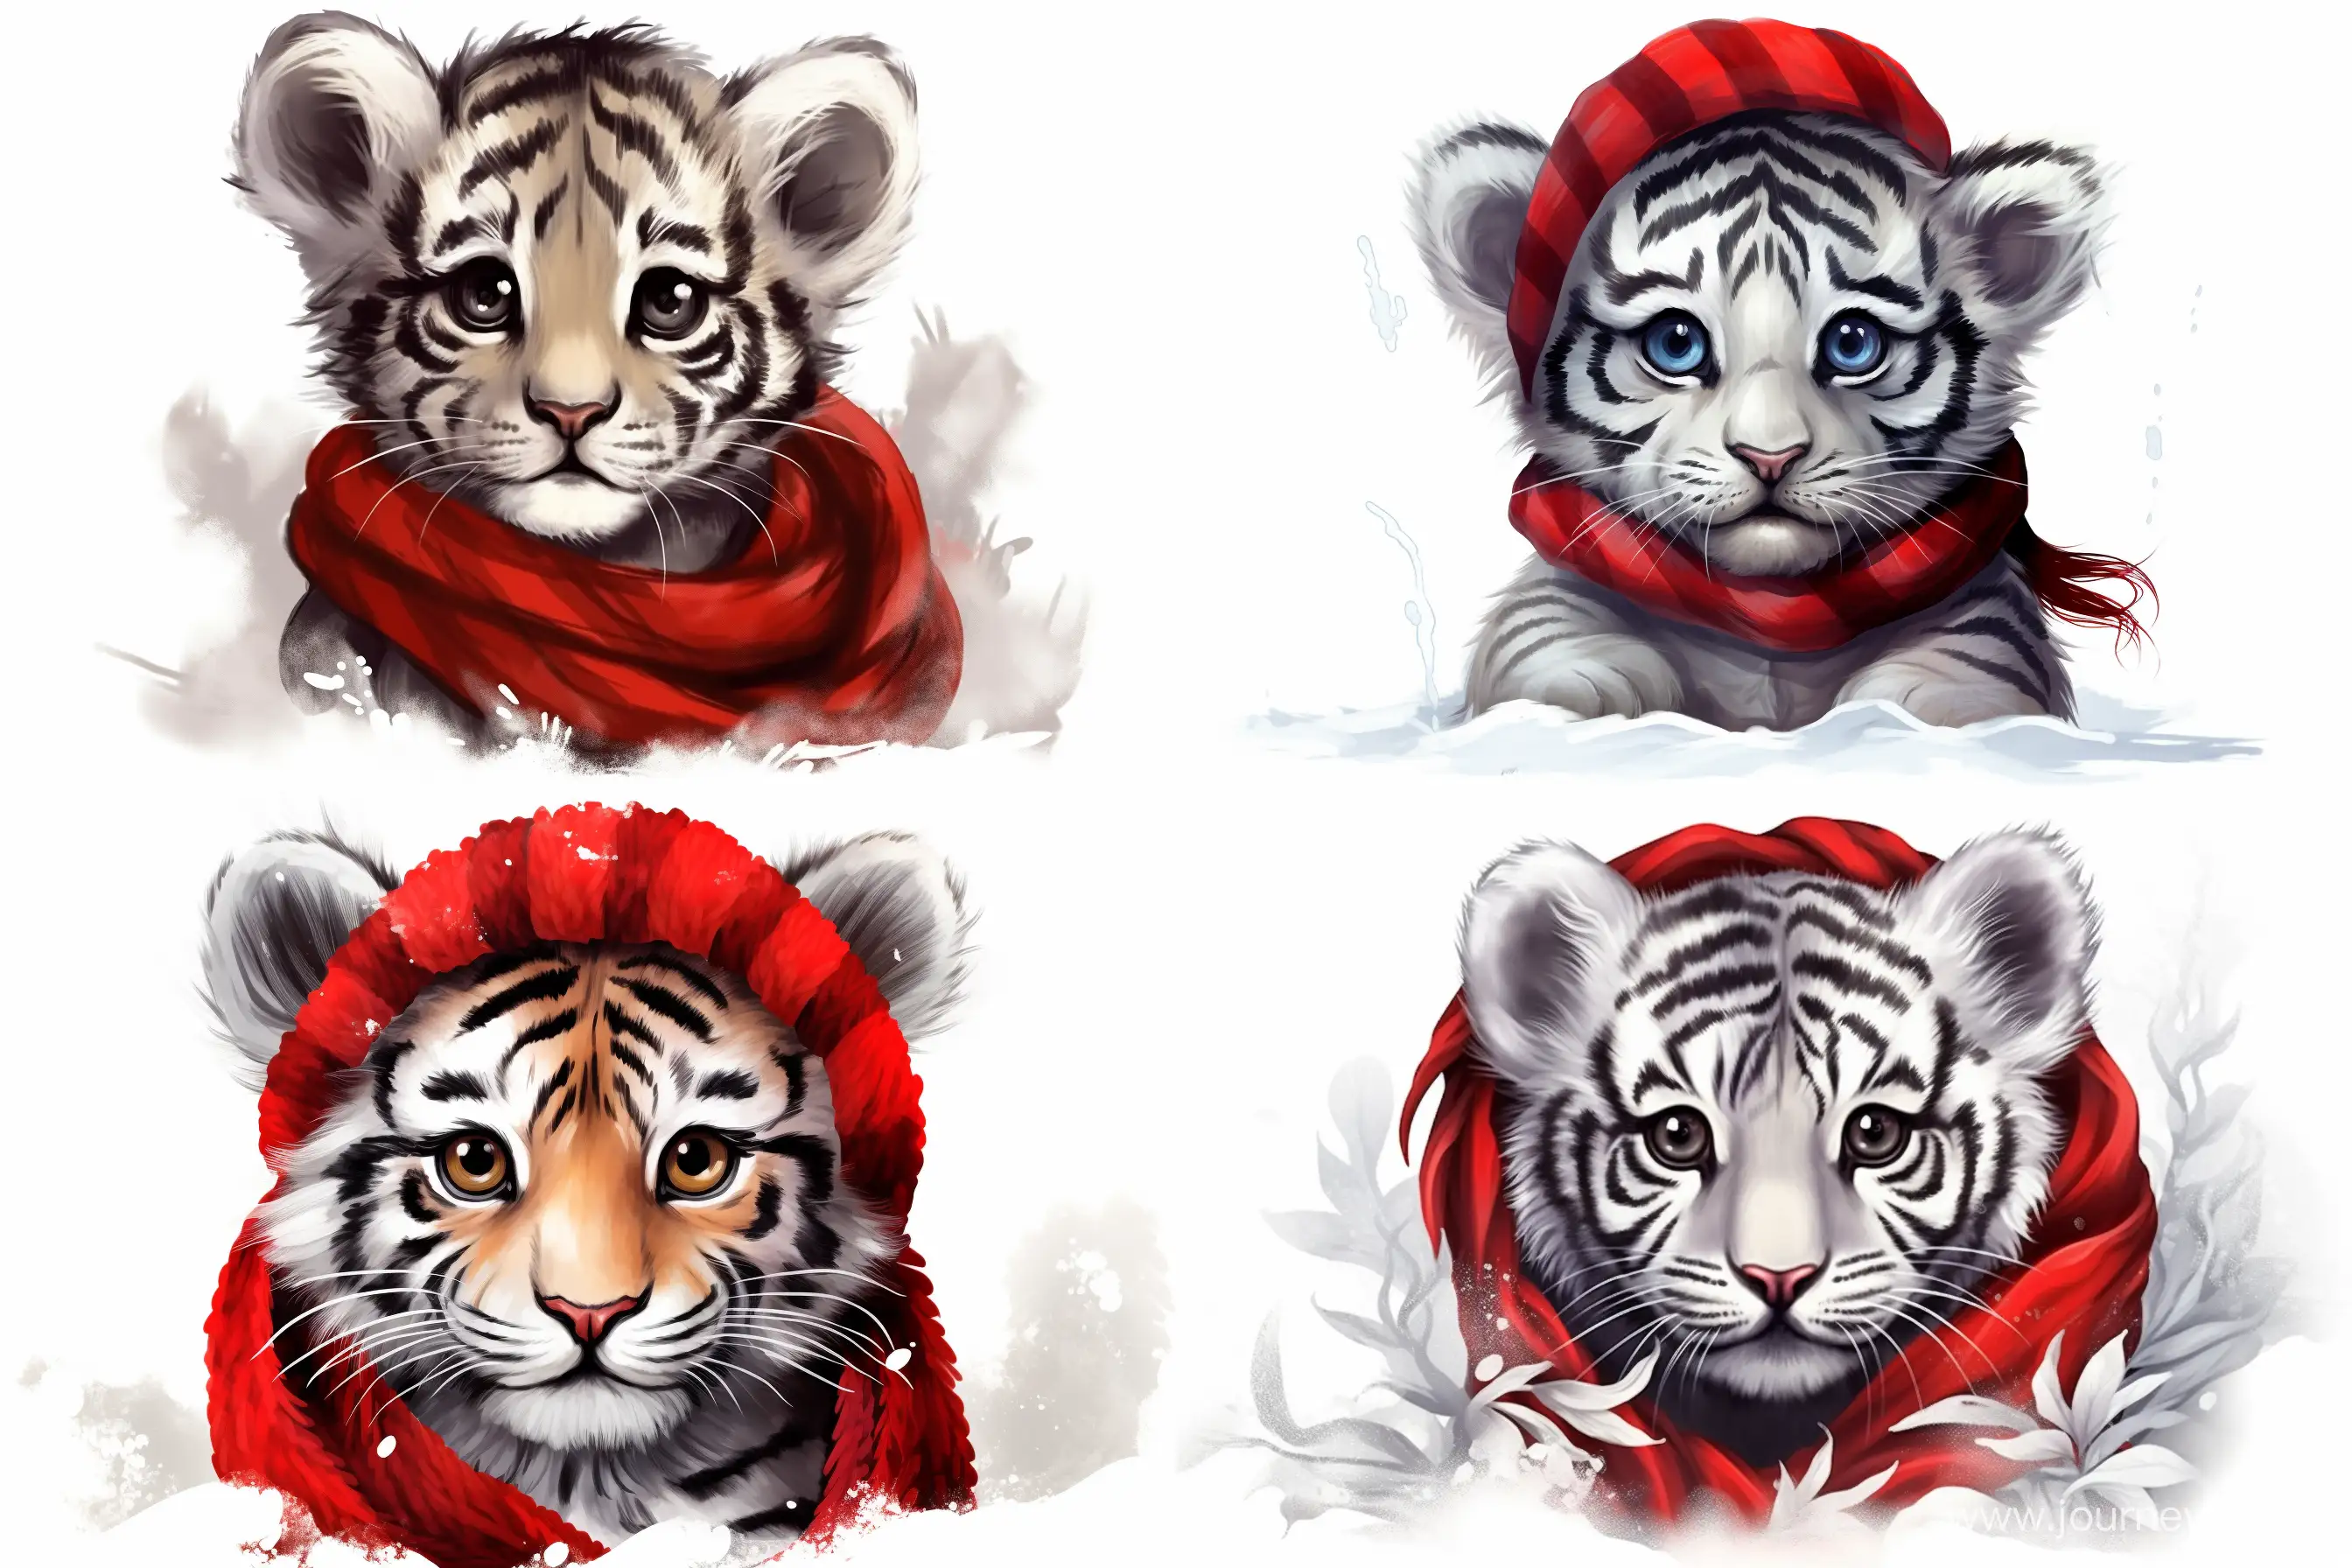 Adorable-Baby-Tiger-in-Red-Scarf-HighDetailed-Watercolor-Cartoon-Portrait